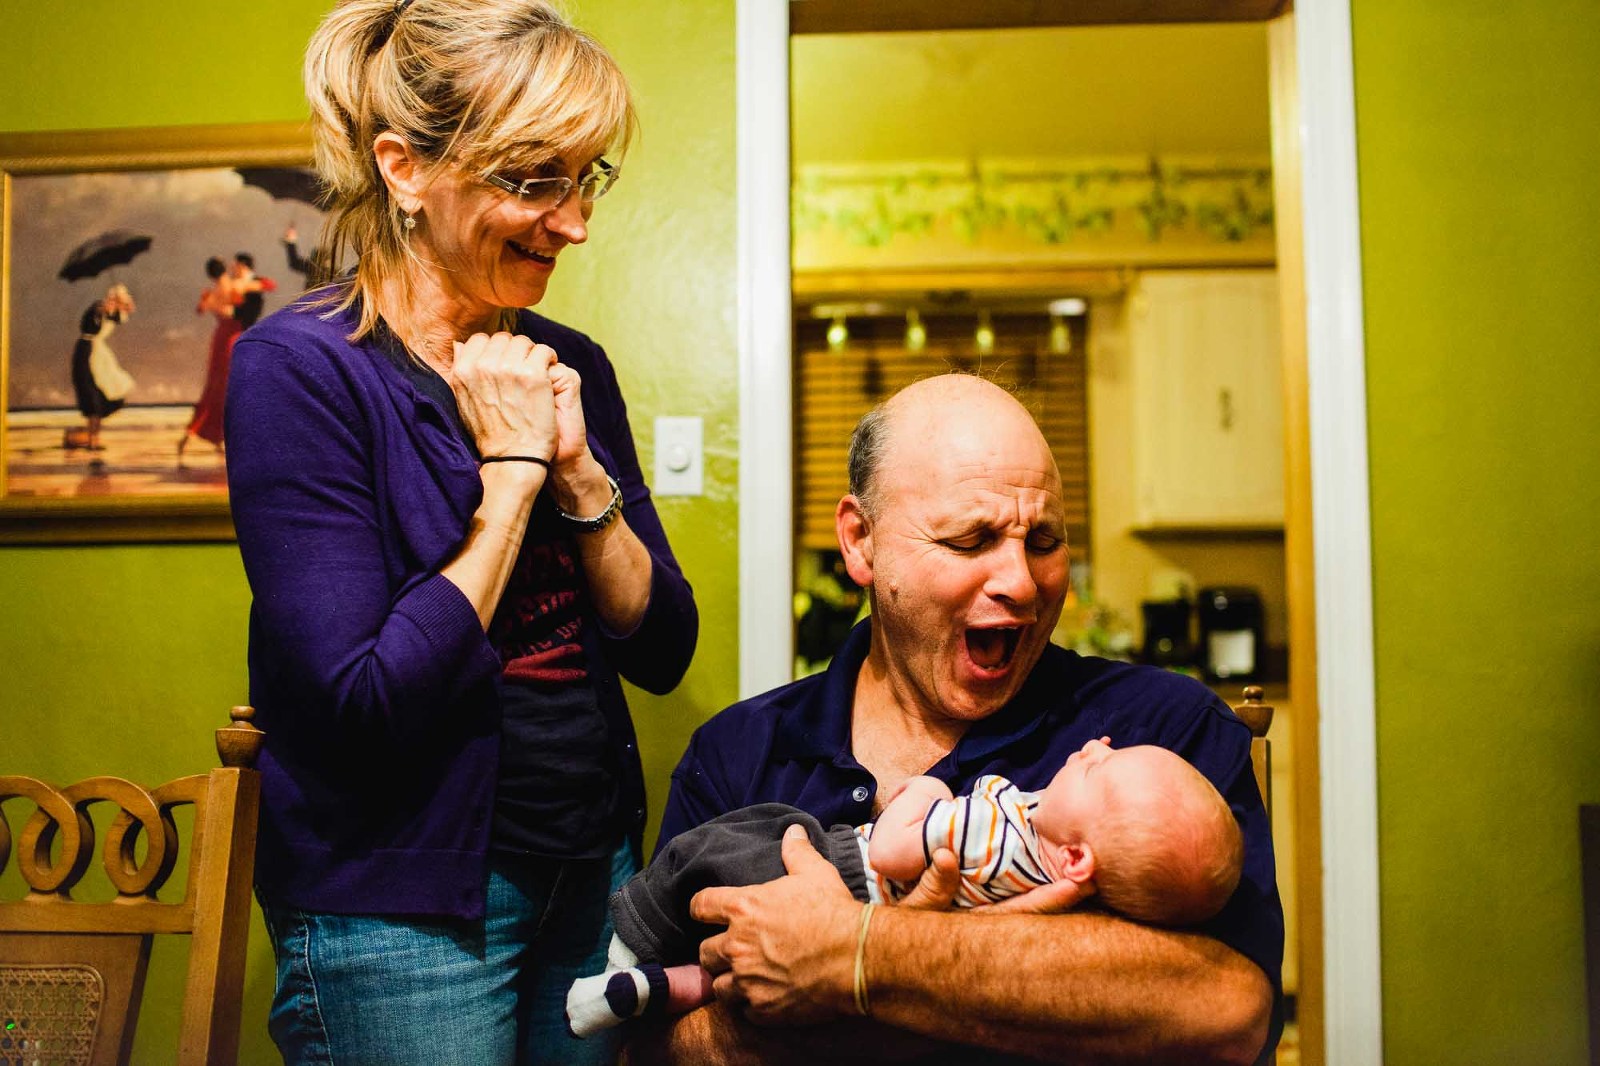 grandpa holds newborn baby and makes crazy expressions at him, while grandma also has wild expression for baby